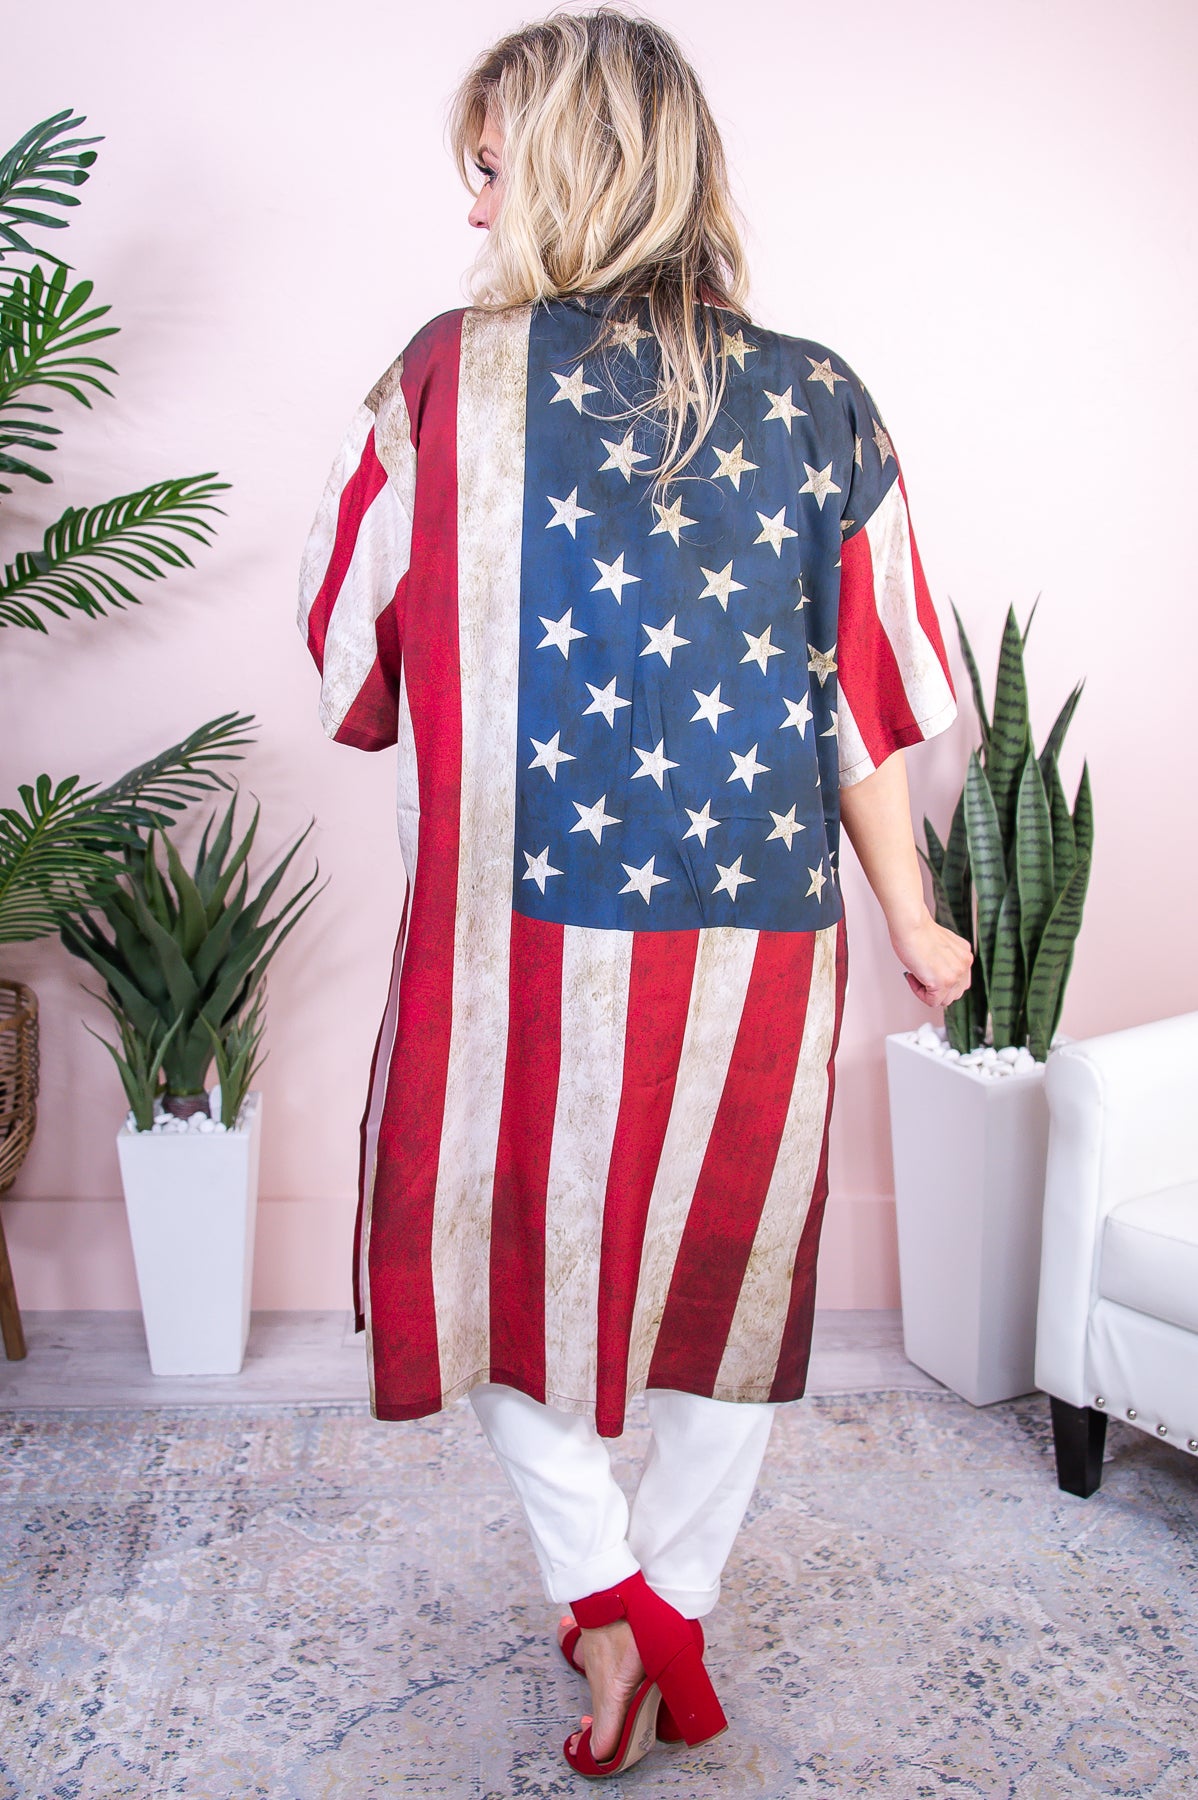 Independance Forever Navy/Multi Color American Flag Kimono (One Size 4-18) - O5435NV